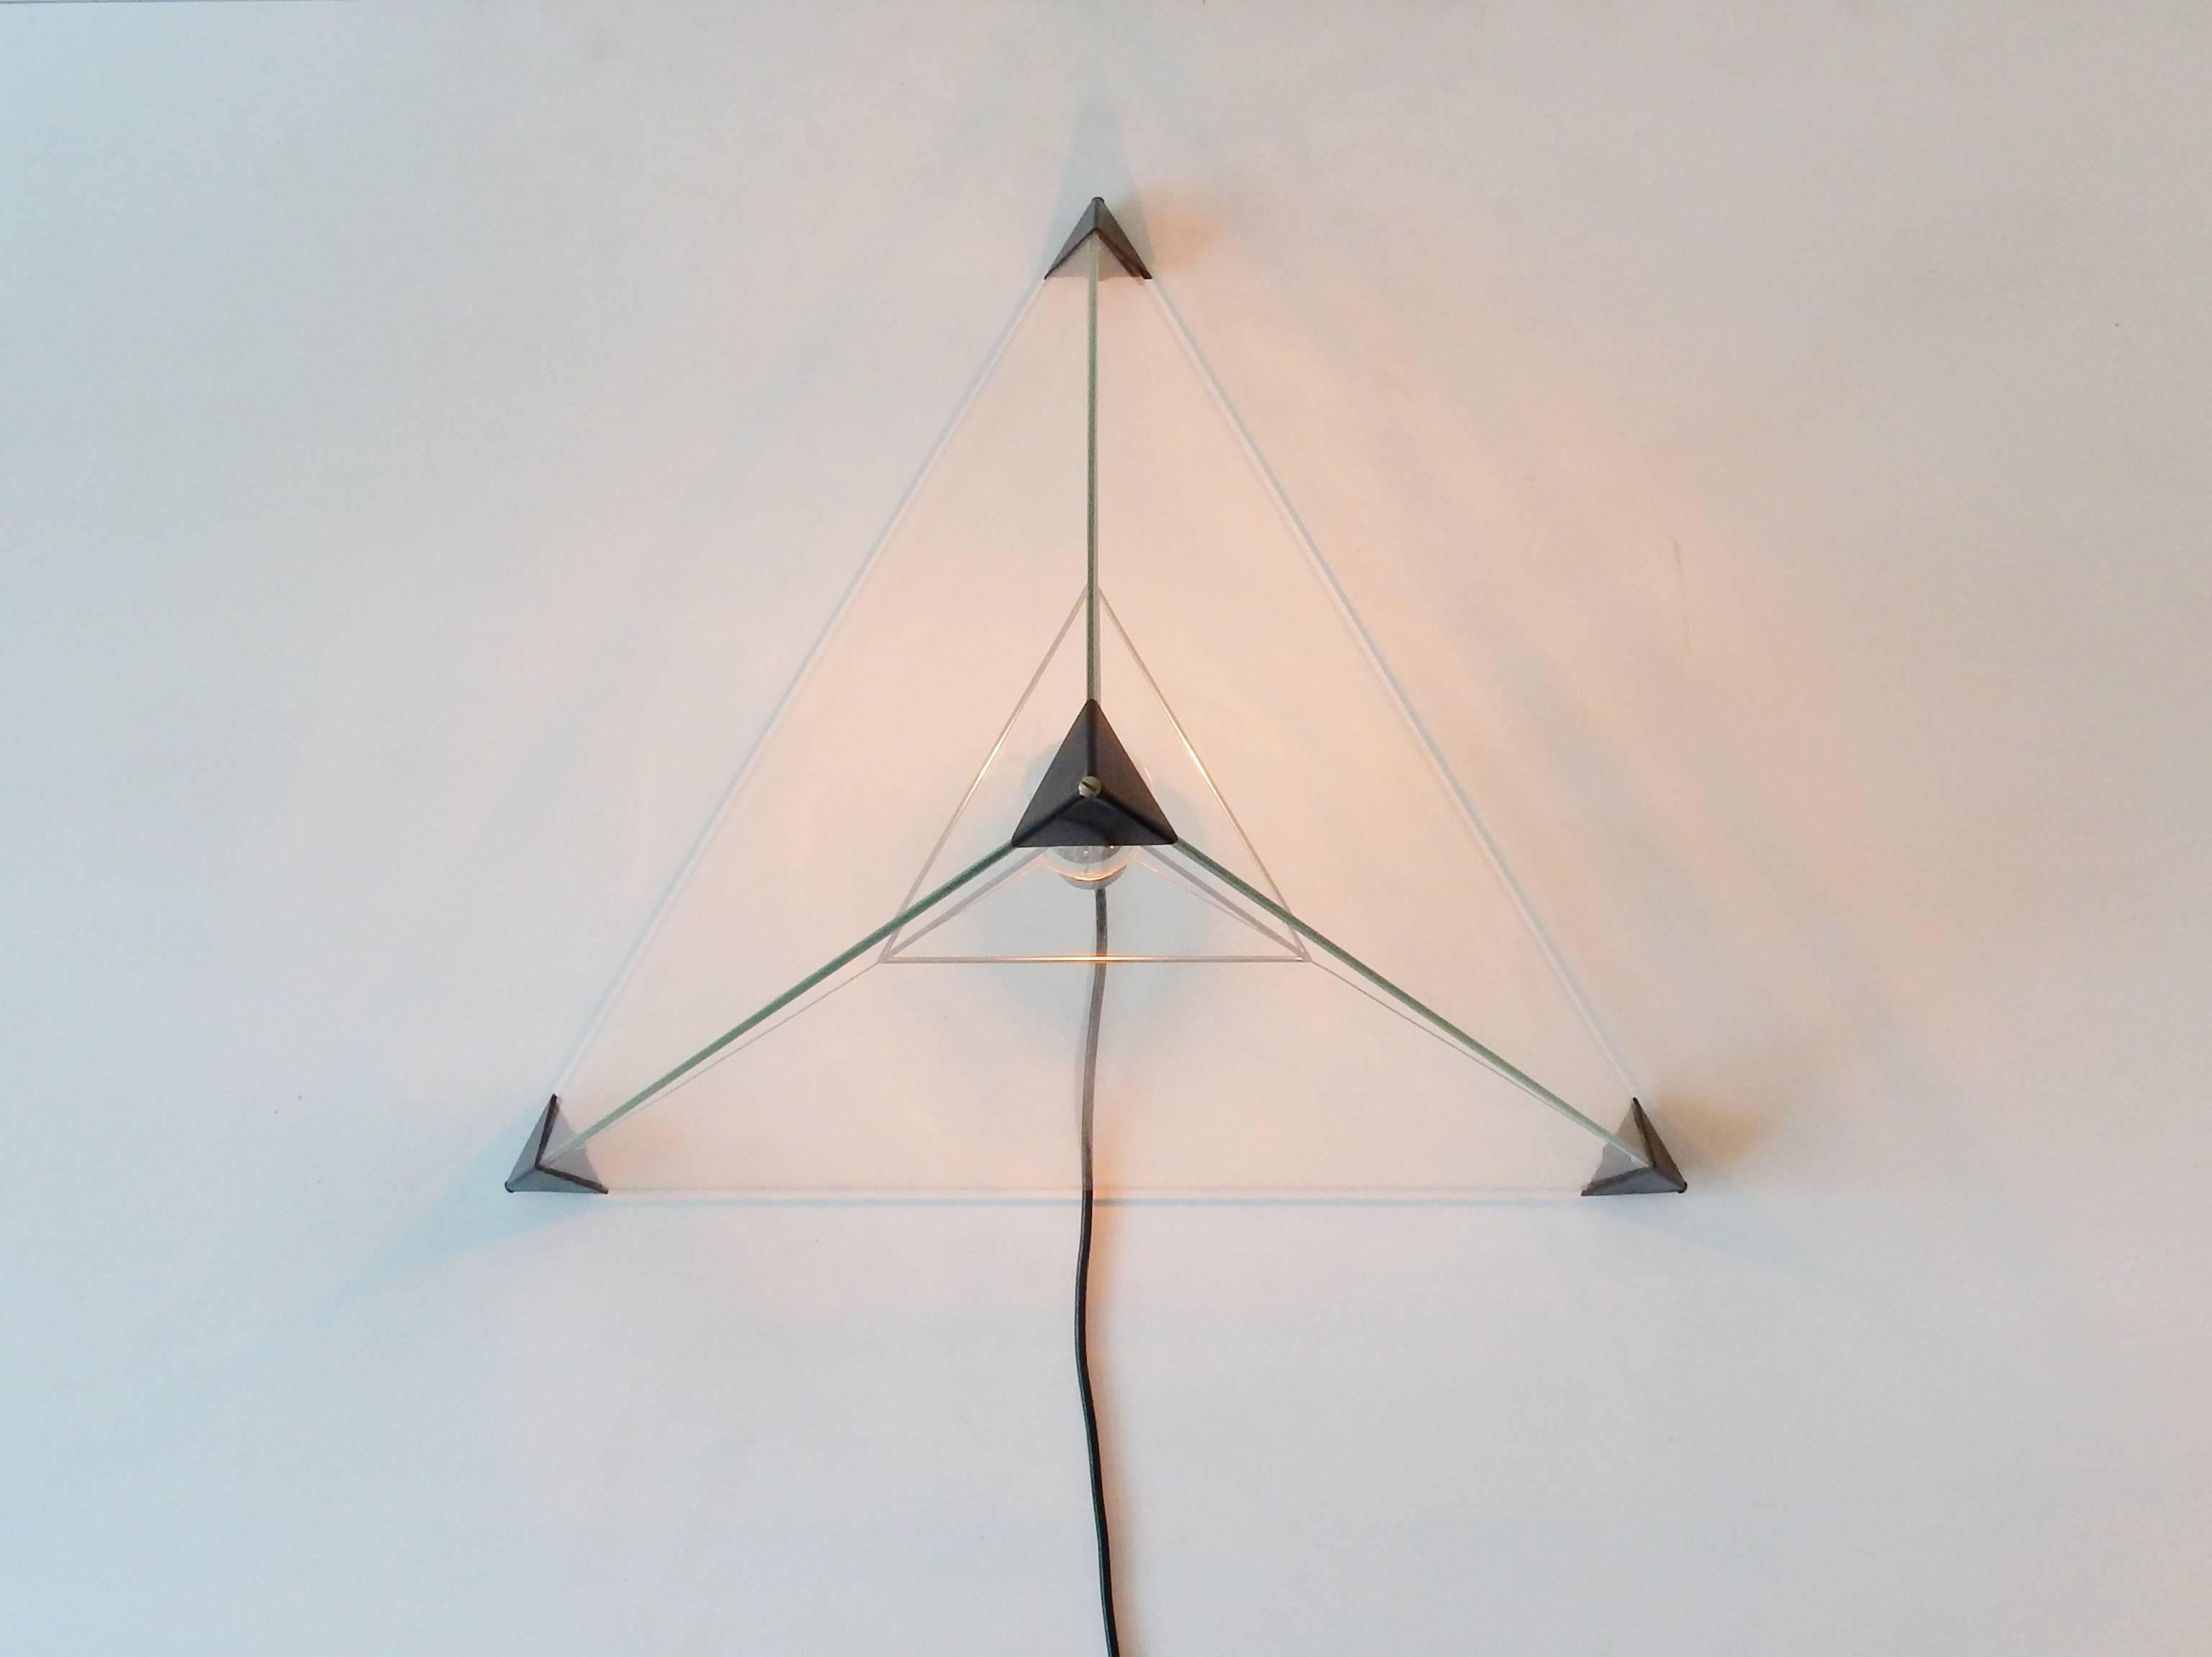 This beautiful lamp is called the 'Tetrahedron'. A design by Frans van Nieuwenborg and Martijn Wegman for Indoor. The light consist out of three glass triangles held together by plastic corner pieces. These corner pieces are connected and held in